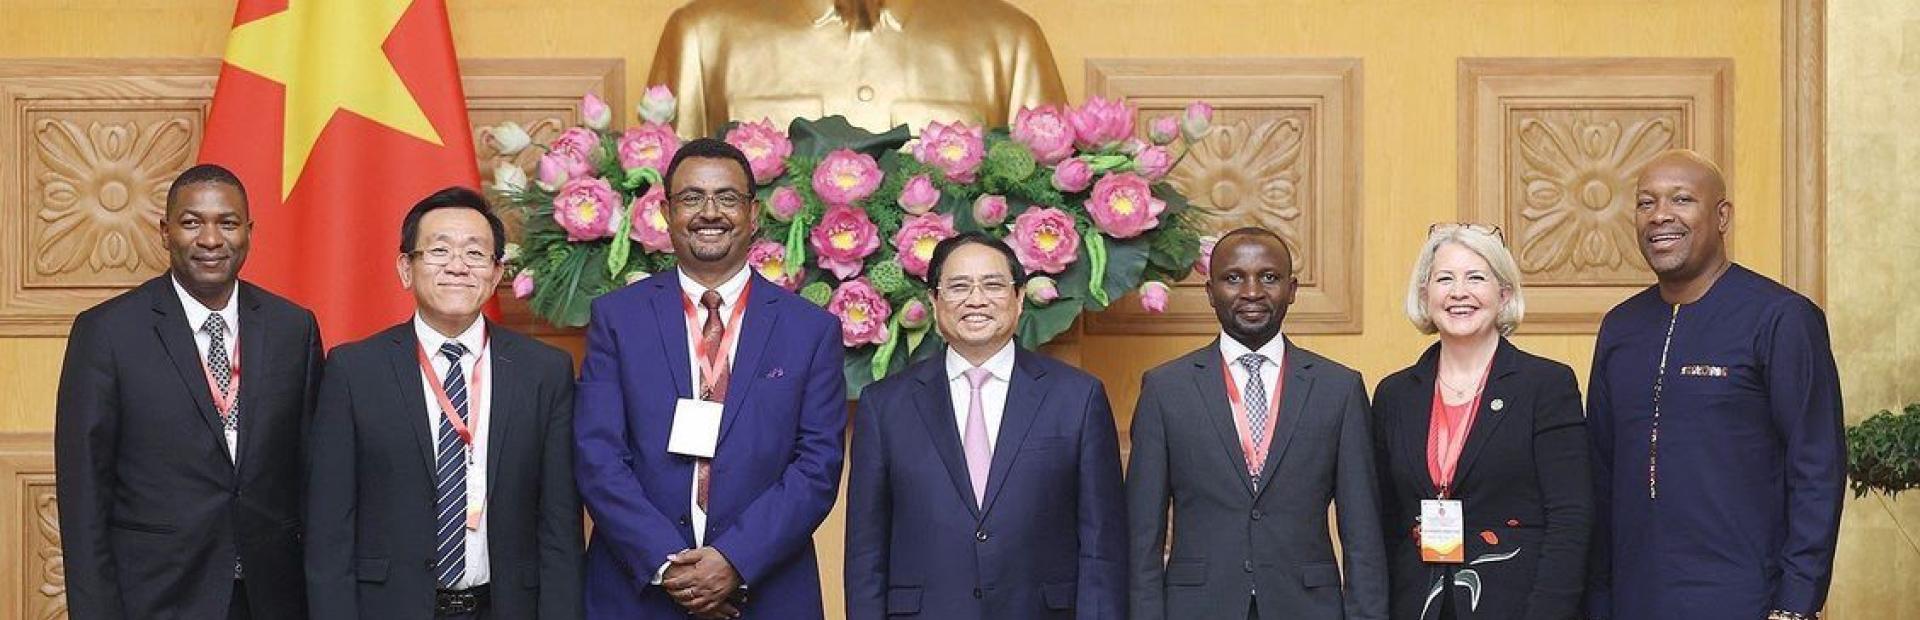 The Vietnamese Prime Minister, Phạm Minh Chính (centre) received the authorities participating in the Conference. On the right, the Minister of Agriculture, Forestry, Fisheries, Rural Transformation, Industry and Labour of Saint Vincent and the Grenadines, Saboto Caesar.